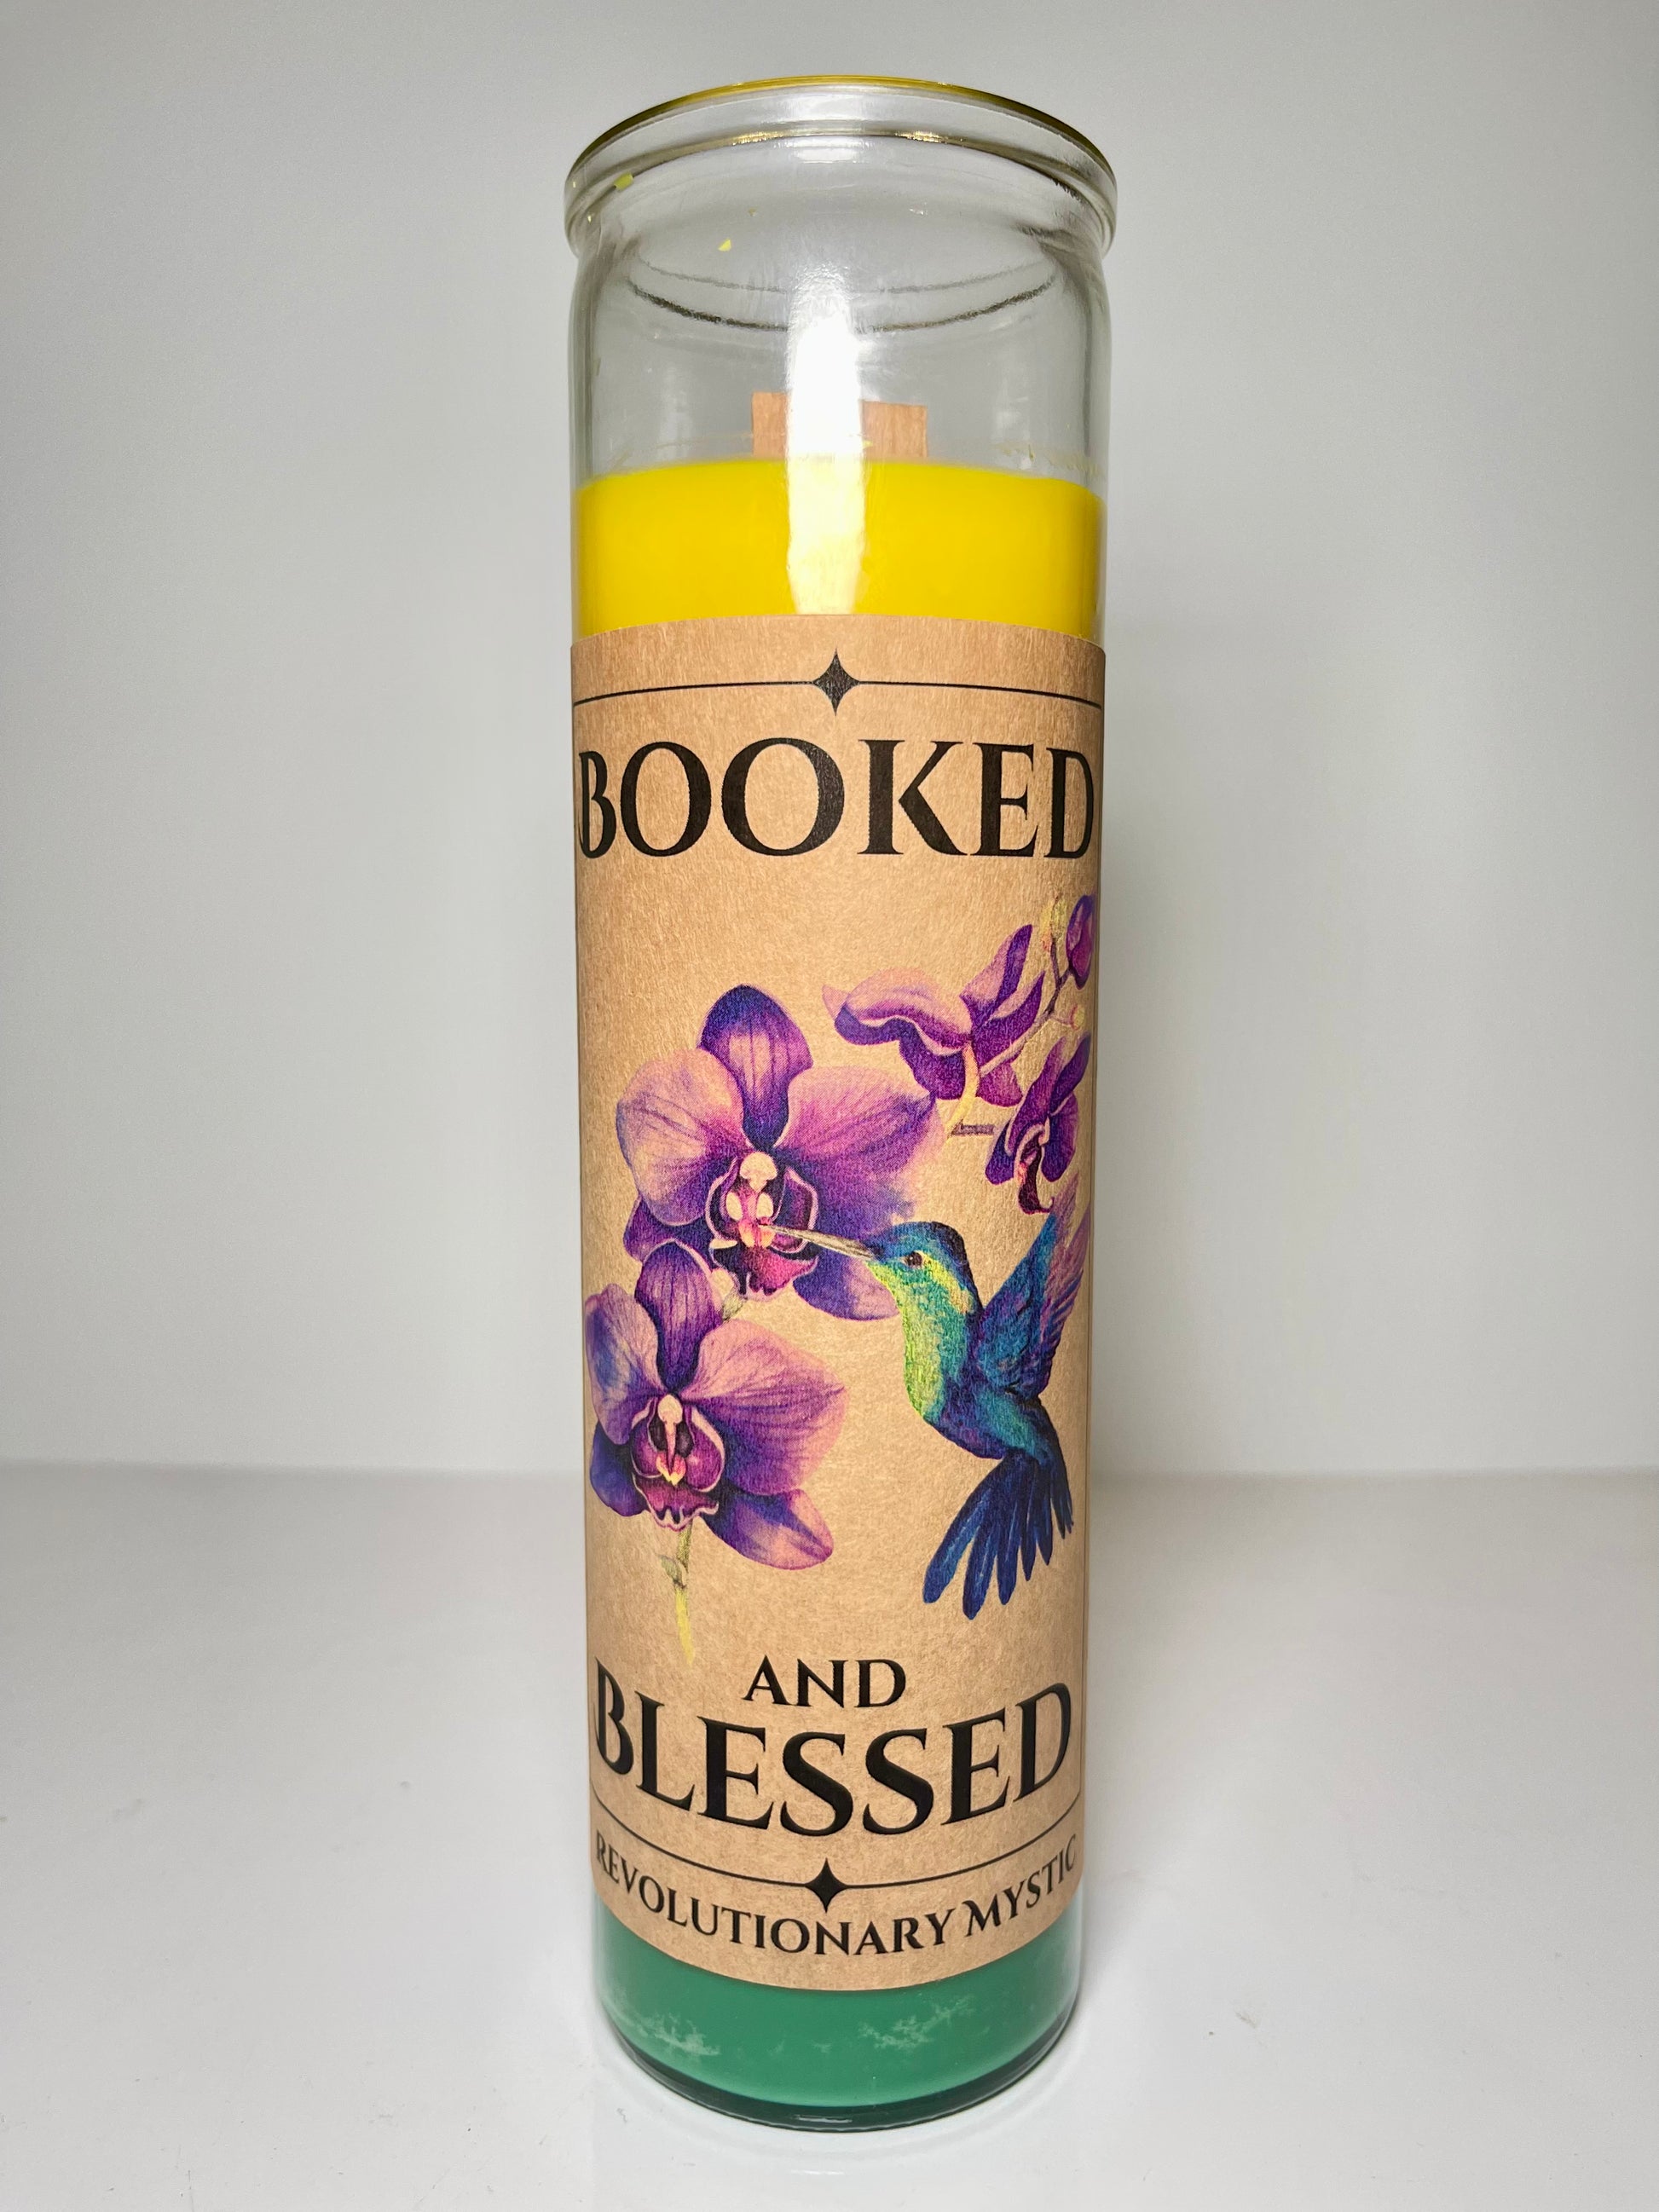 Booked and Blessed Candle - Revolutionary Mystic